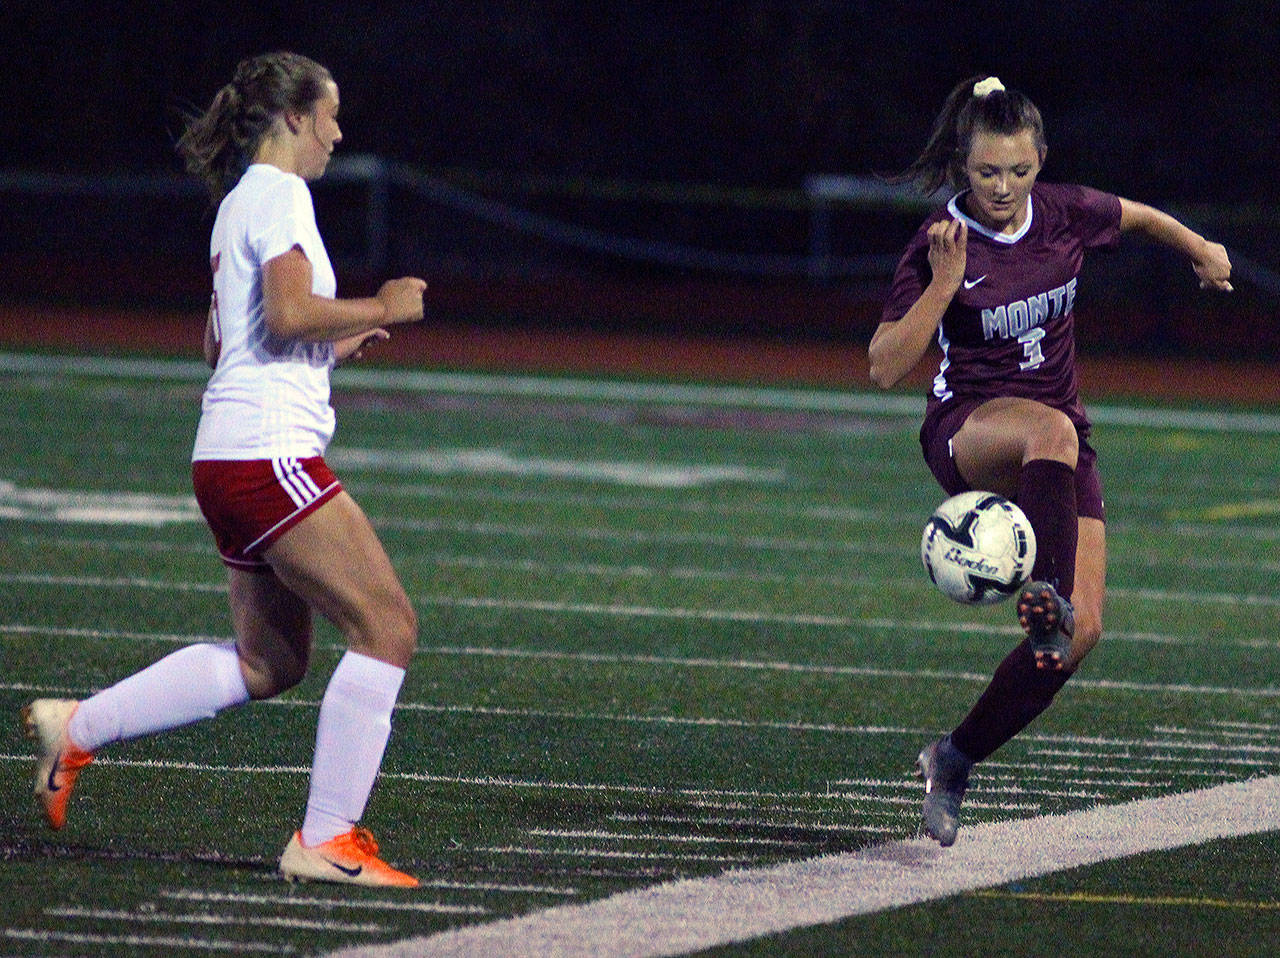 Montesano’s Sierra Birdsall controls a pass near the sidelines while defended by Hoquiam’s Emily Daniels in the first half of a match at Jack Rottle Field in Montesano. (Hasani Grayson | Grays Harbor News Group)